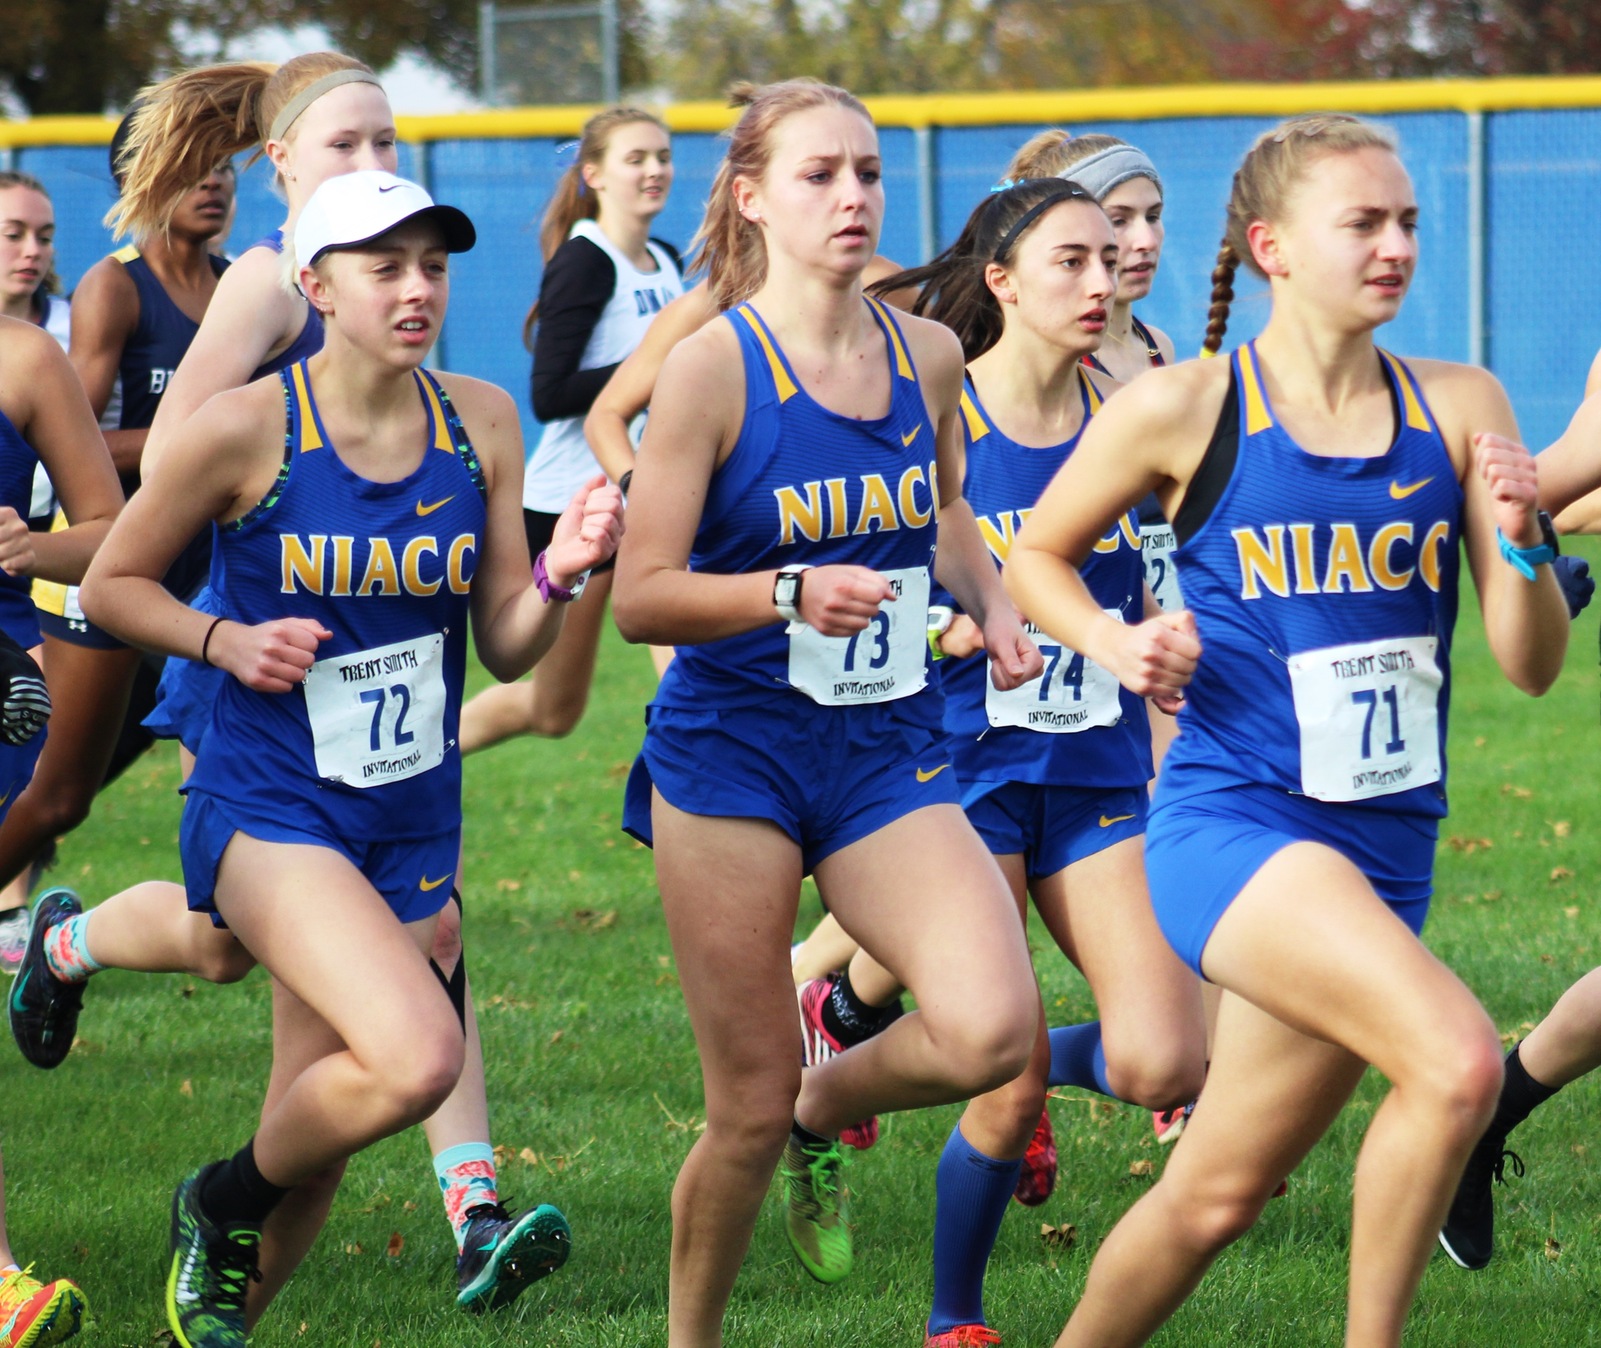 The NIACC women's cross country team competes at the Trent Smith Invitational on Oct. 12 on the NIACC campus.